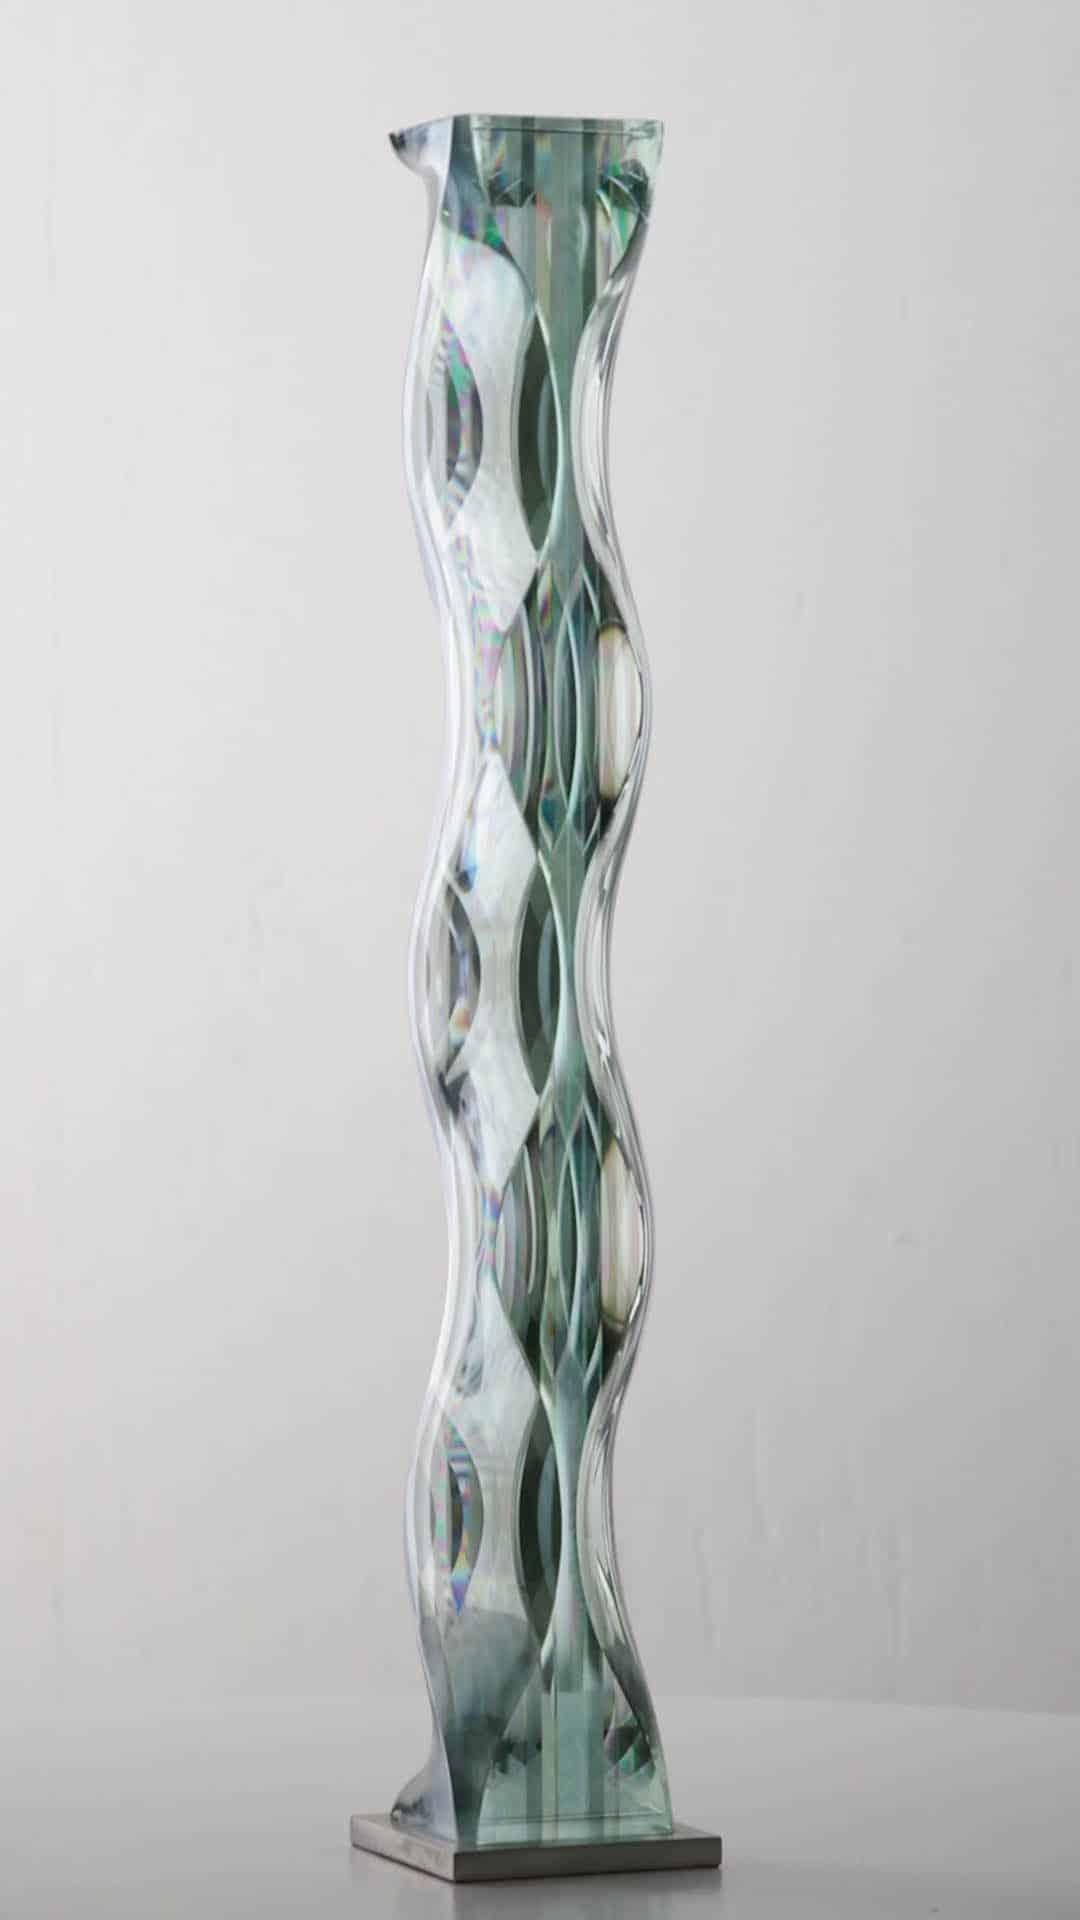 M.180601 by Toshio Iezumi - Contemporary glass sculpture, green, abstract For Sale 2